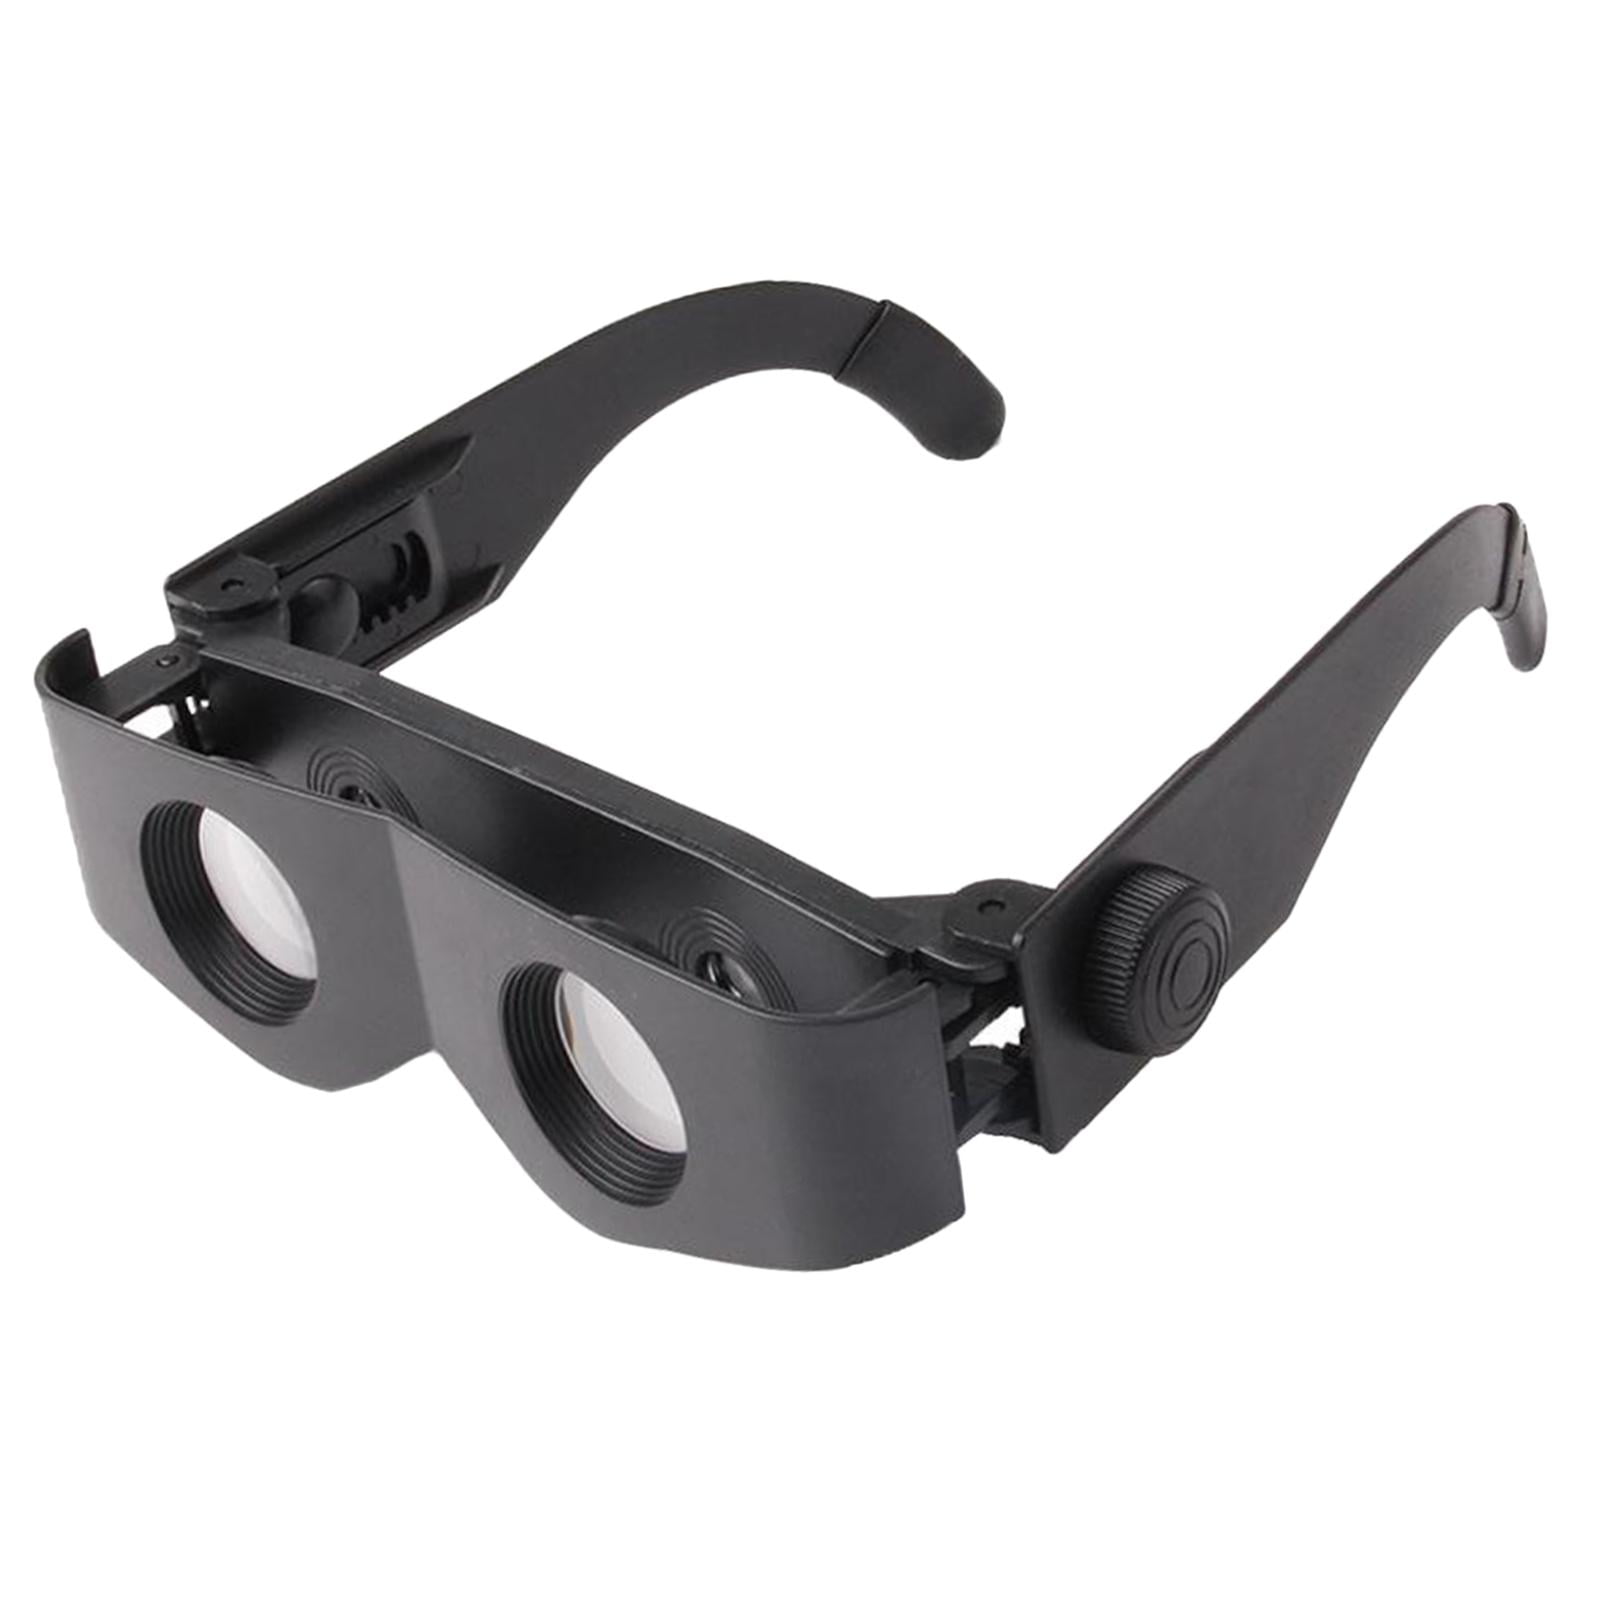 LED Magnifying Glasses w/ 1.6X Magnification - Bright Lighted Eyeglass  Lights, USB Rechargeable, Lightweight & Durable - LED Eyewear Enhances Your